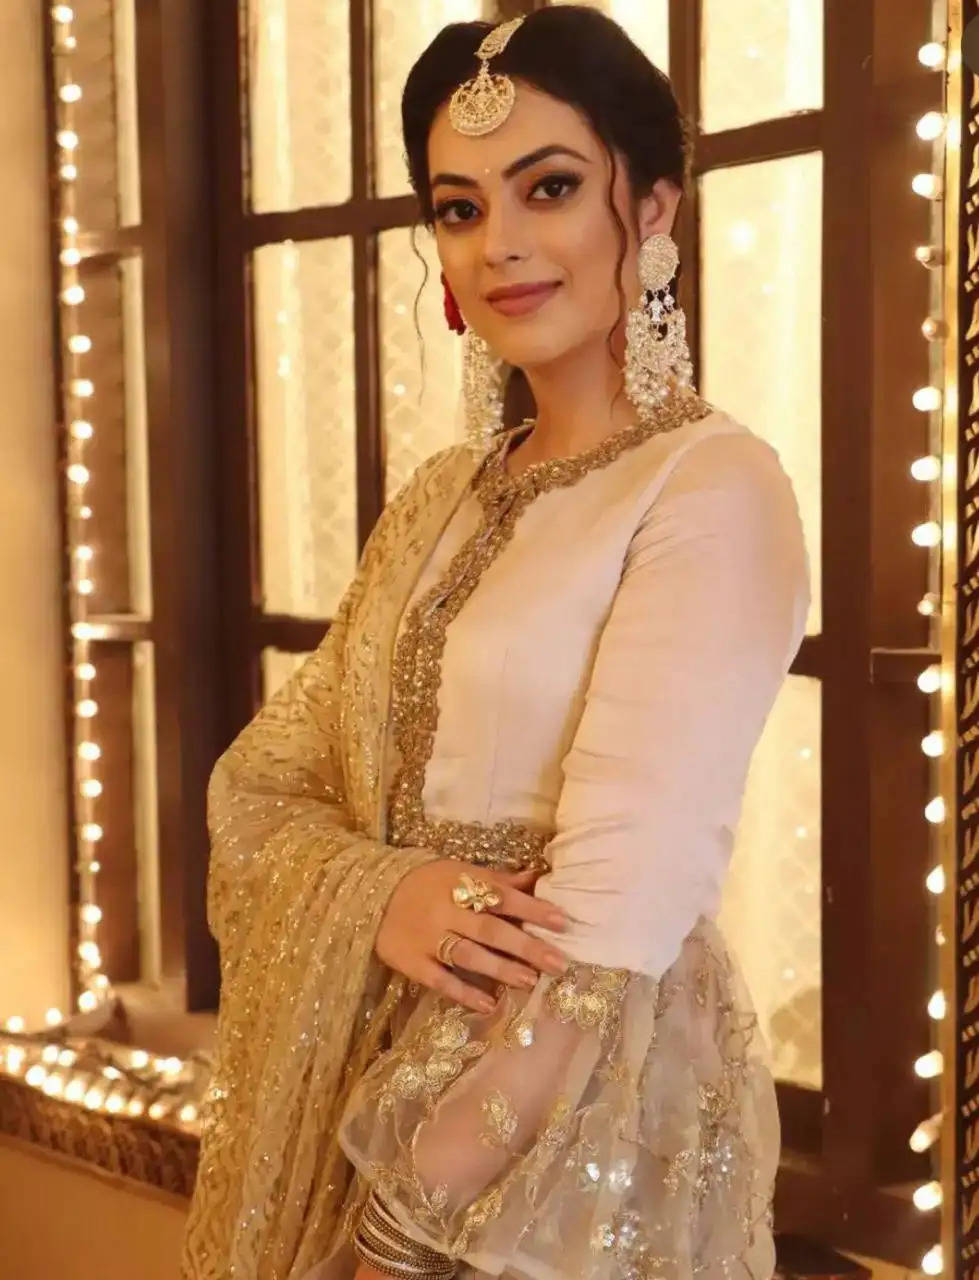 I am really about bringing this new character to life: Seerat Kapoor on joining ‘Rabb Se Hai Dua’